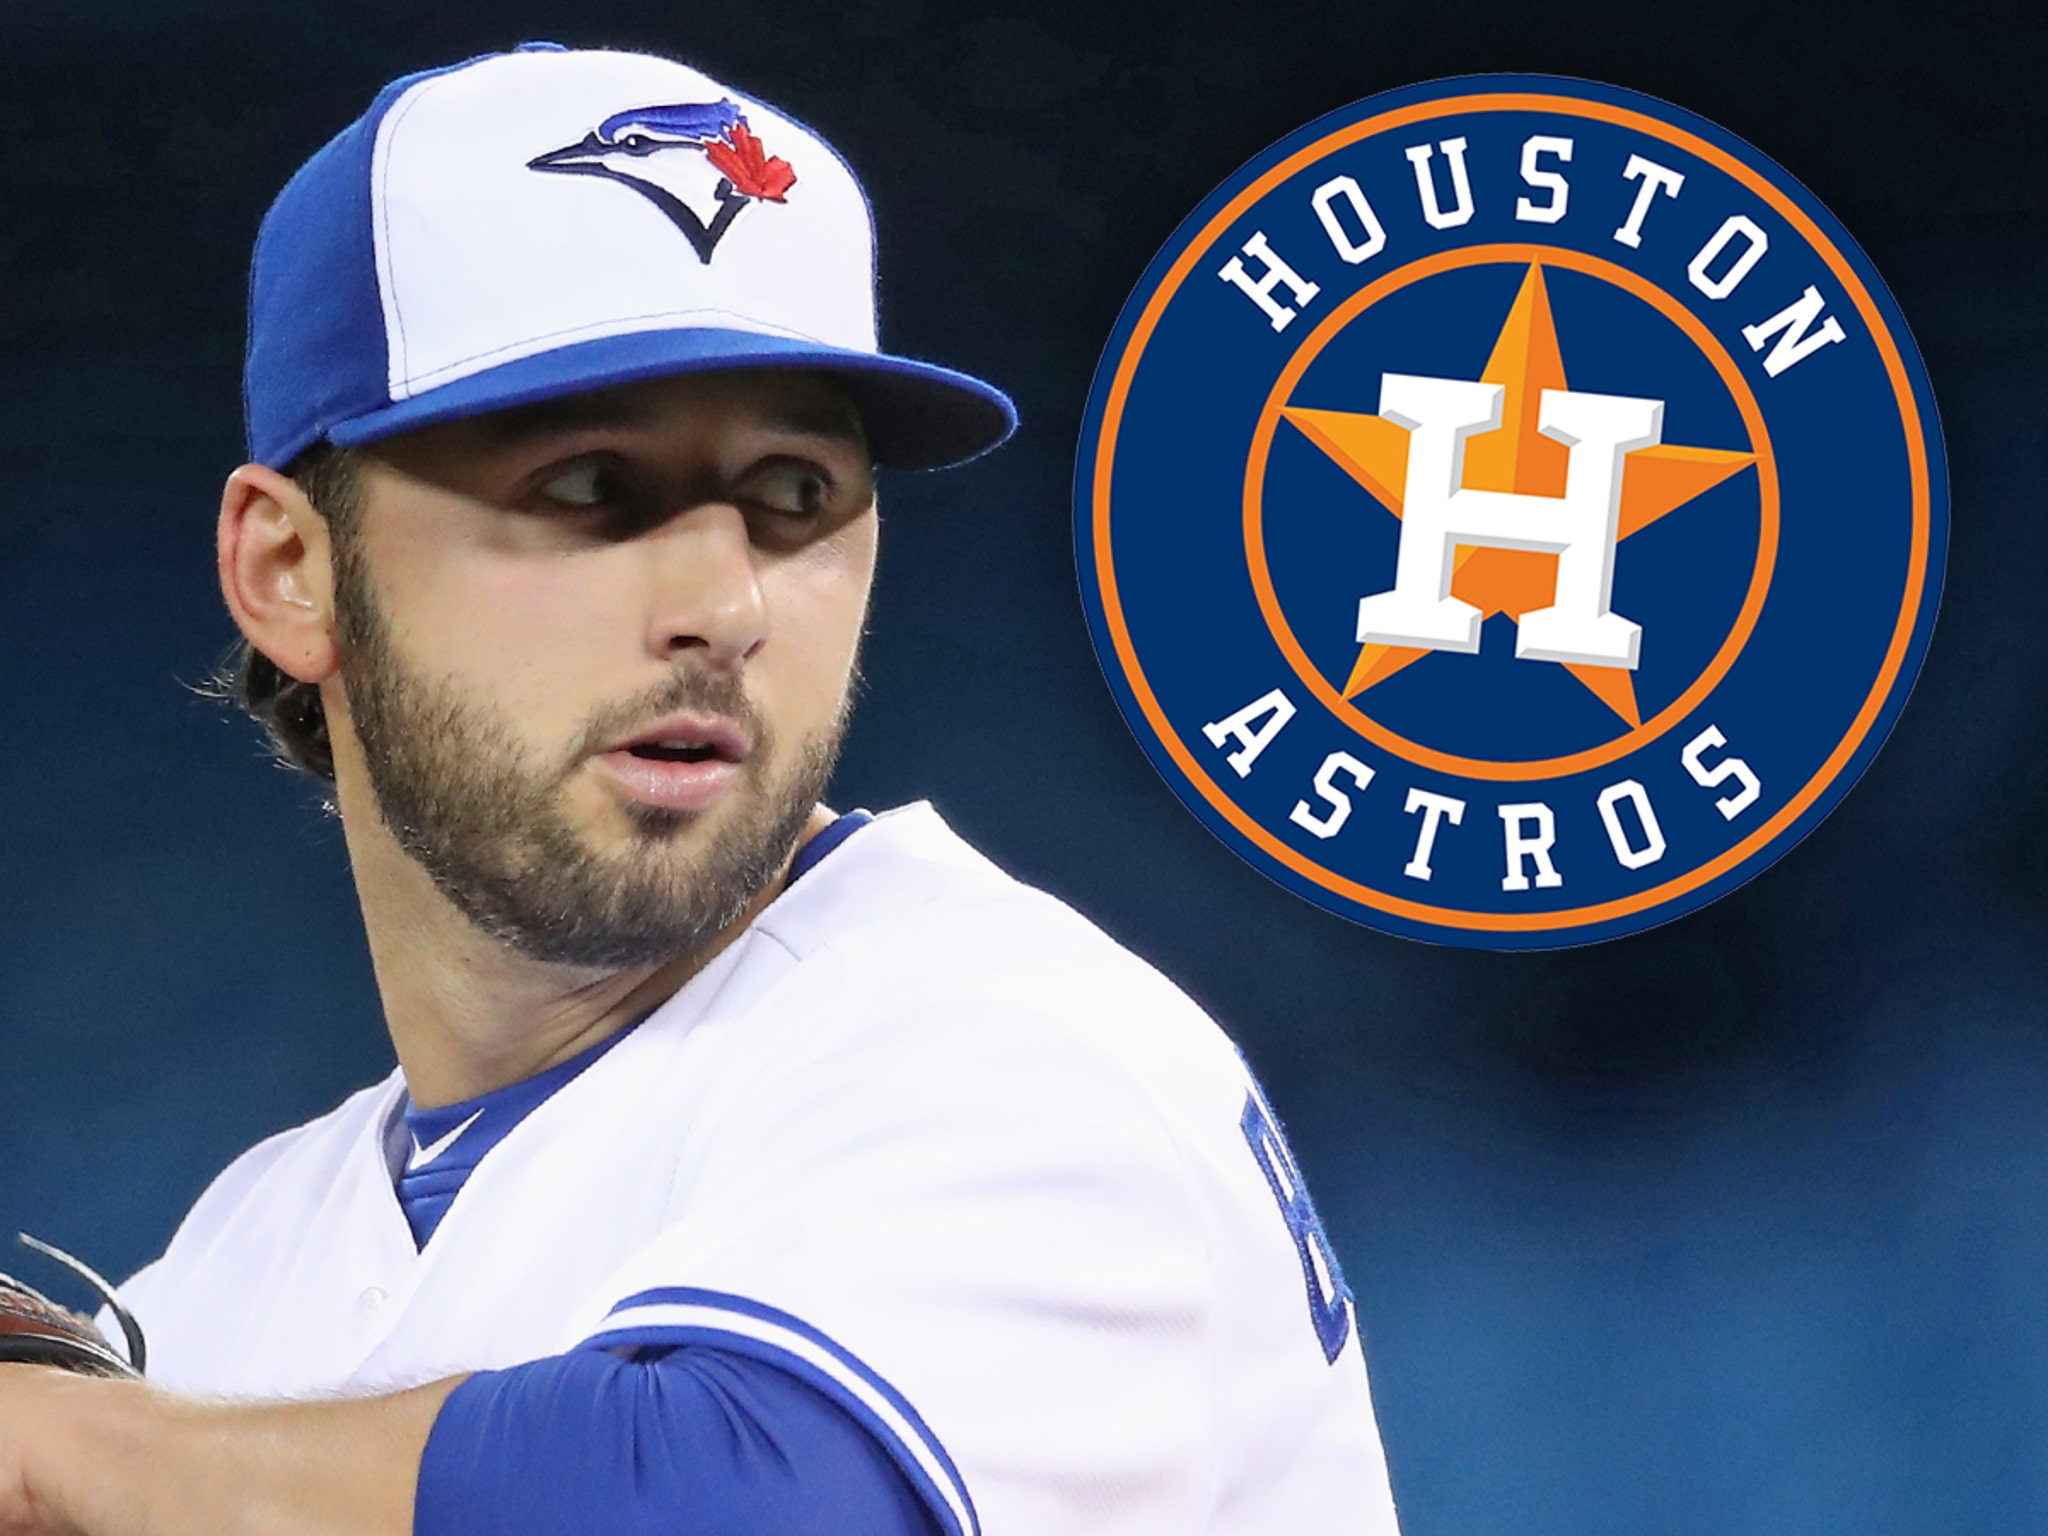 Ex-MLB Pitcher Sues Astros Over Cheating Scandal, You Ruined My Career!